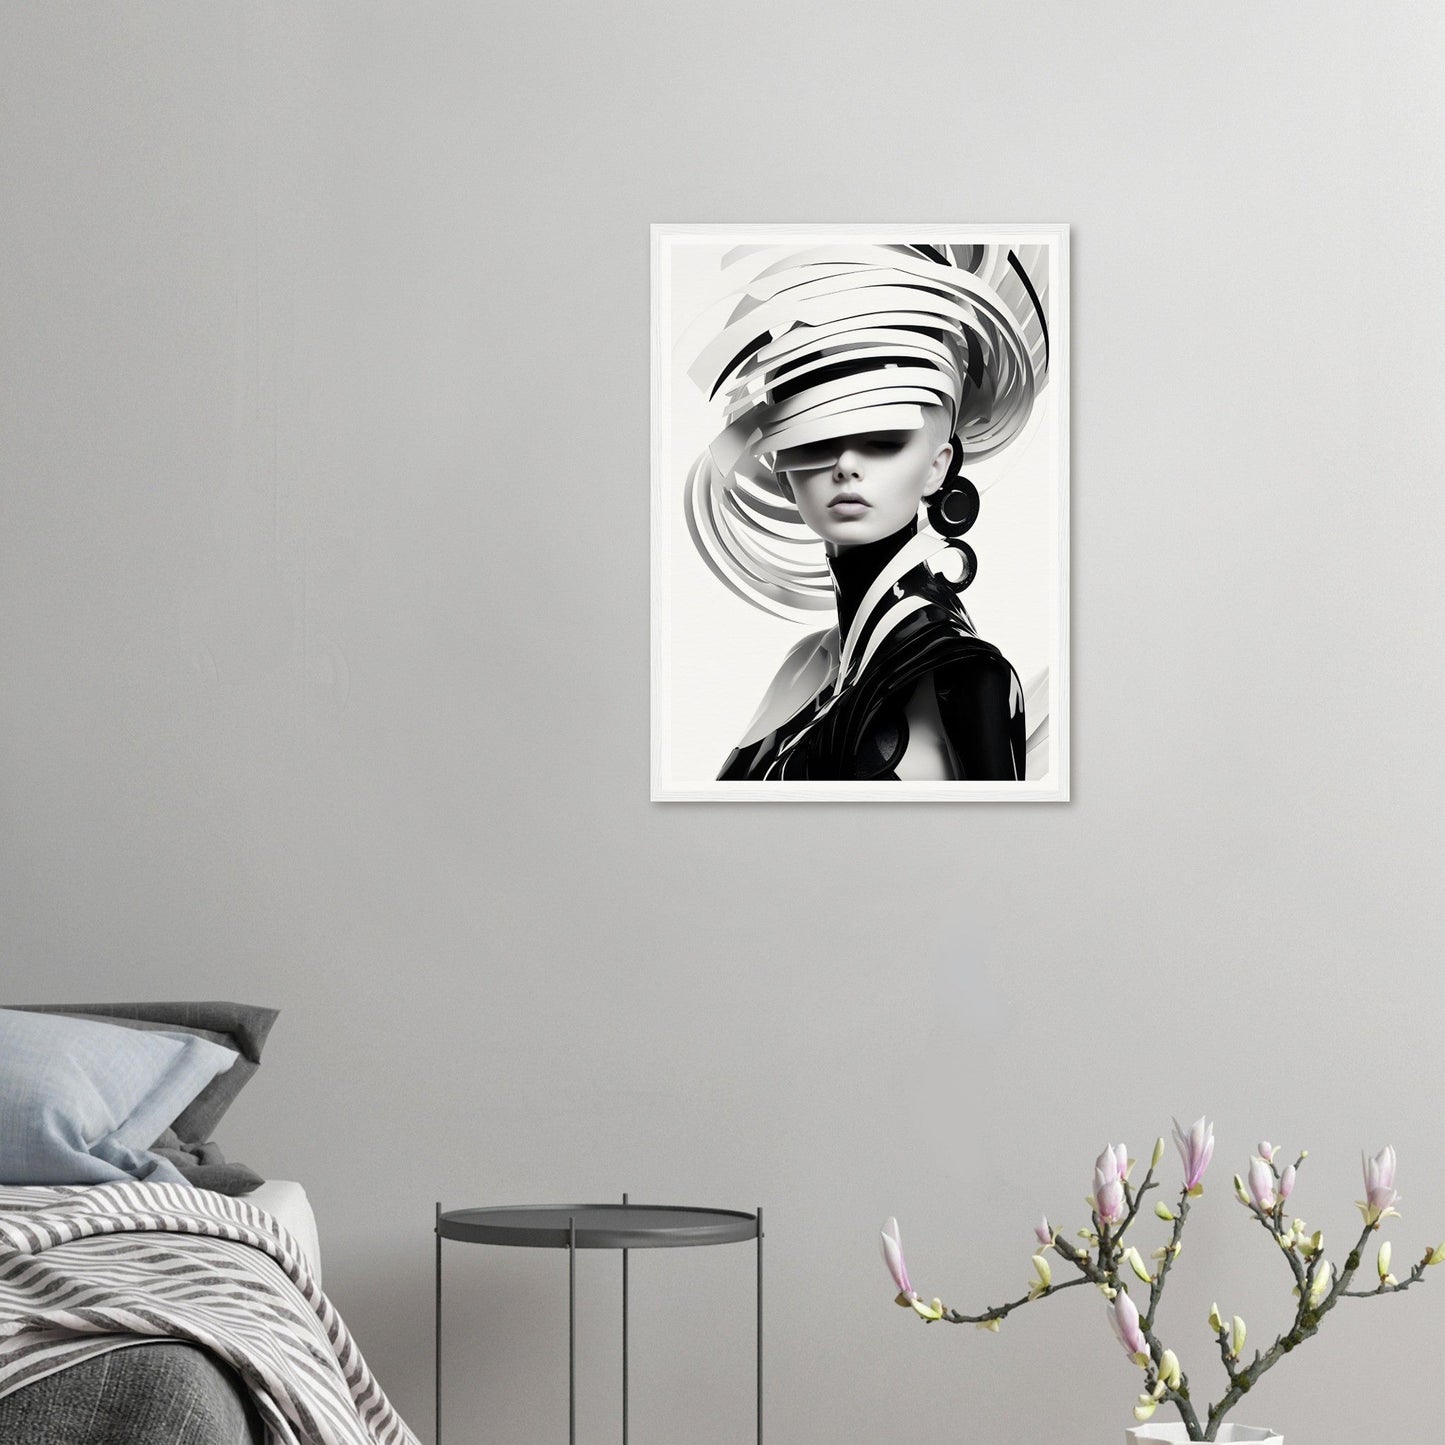 A black and white portrait of a woman, perfect for an Energy Lines C The Oracle Windows™ Collection poster for my wall.